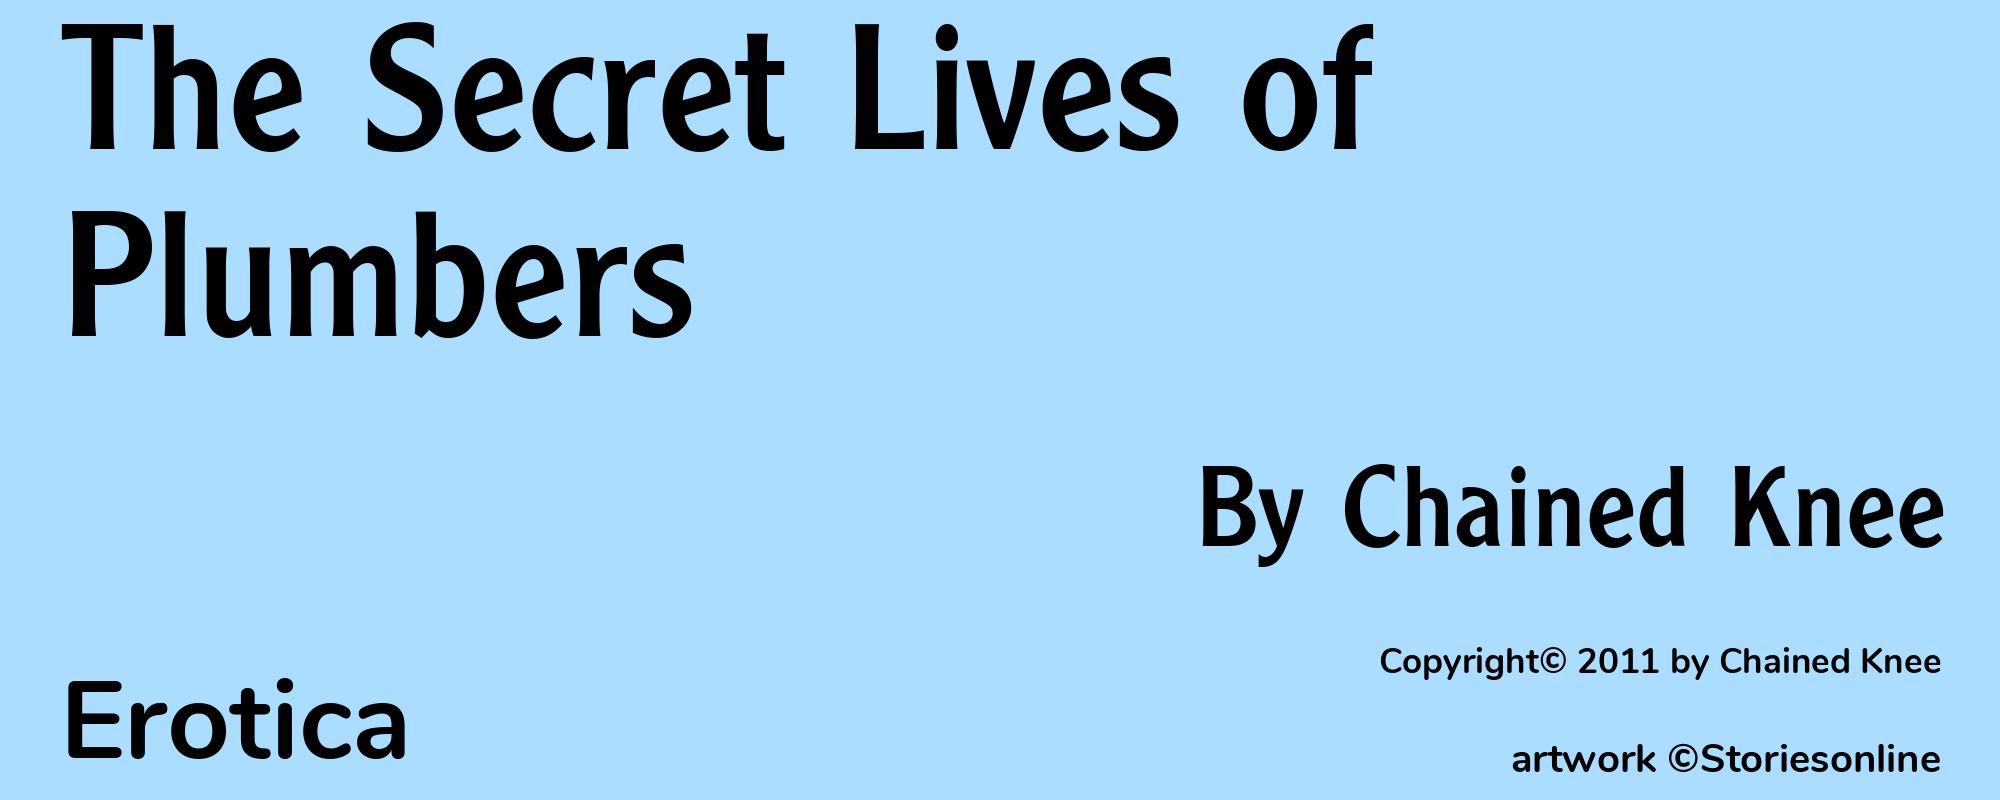 The Secret Lives of Plumbers - Cover